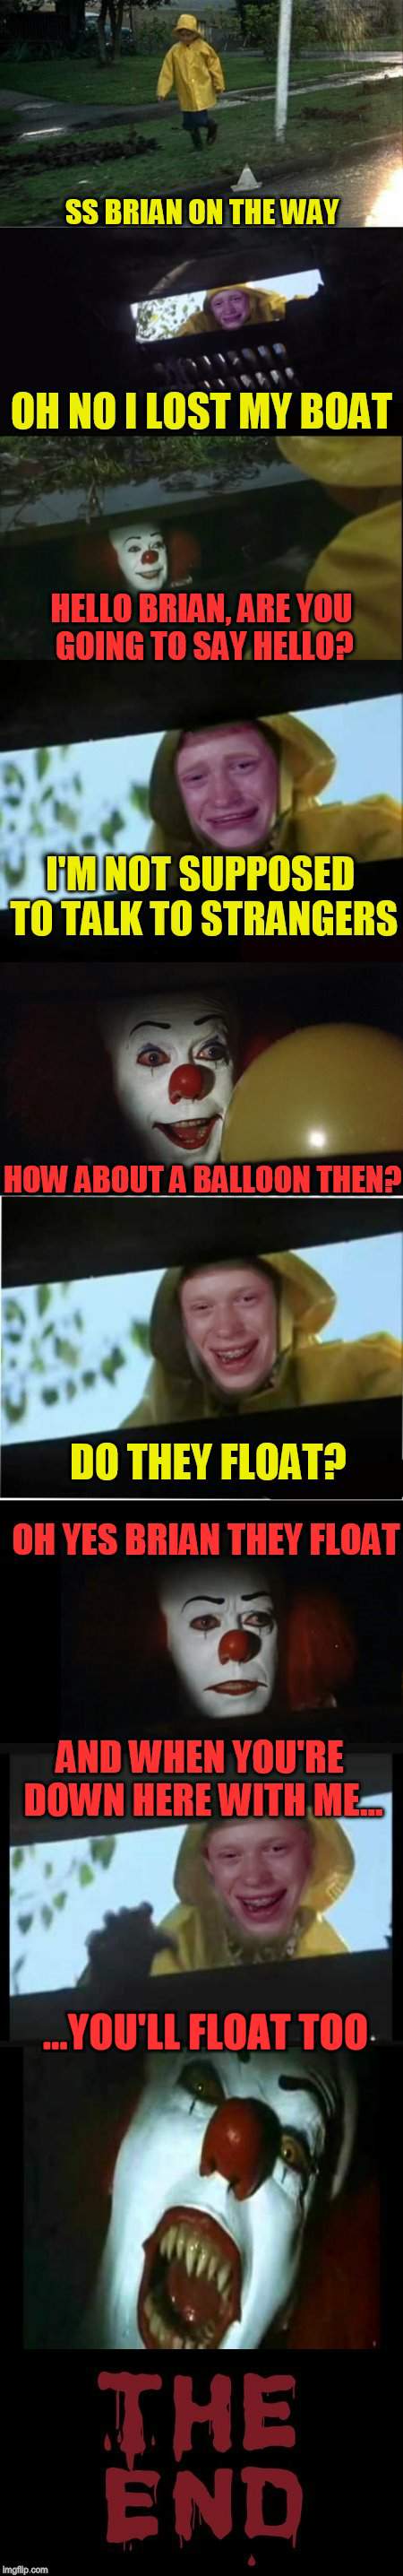 Bad Luck Brian Meets Pennywise The Dancing Clown | ...YOU'LL FLOAT TOO | image tagged in bad luck brian,pennywise the dancing clown,funny meme,book,movie quotes | made w/ Imgflip meme maker